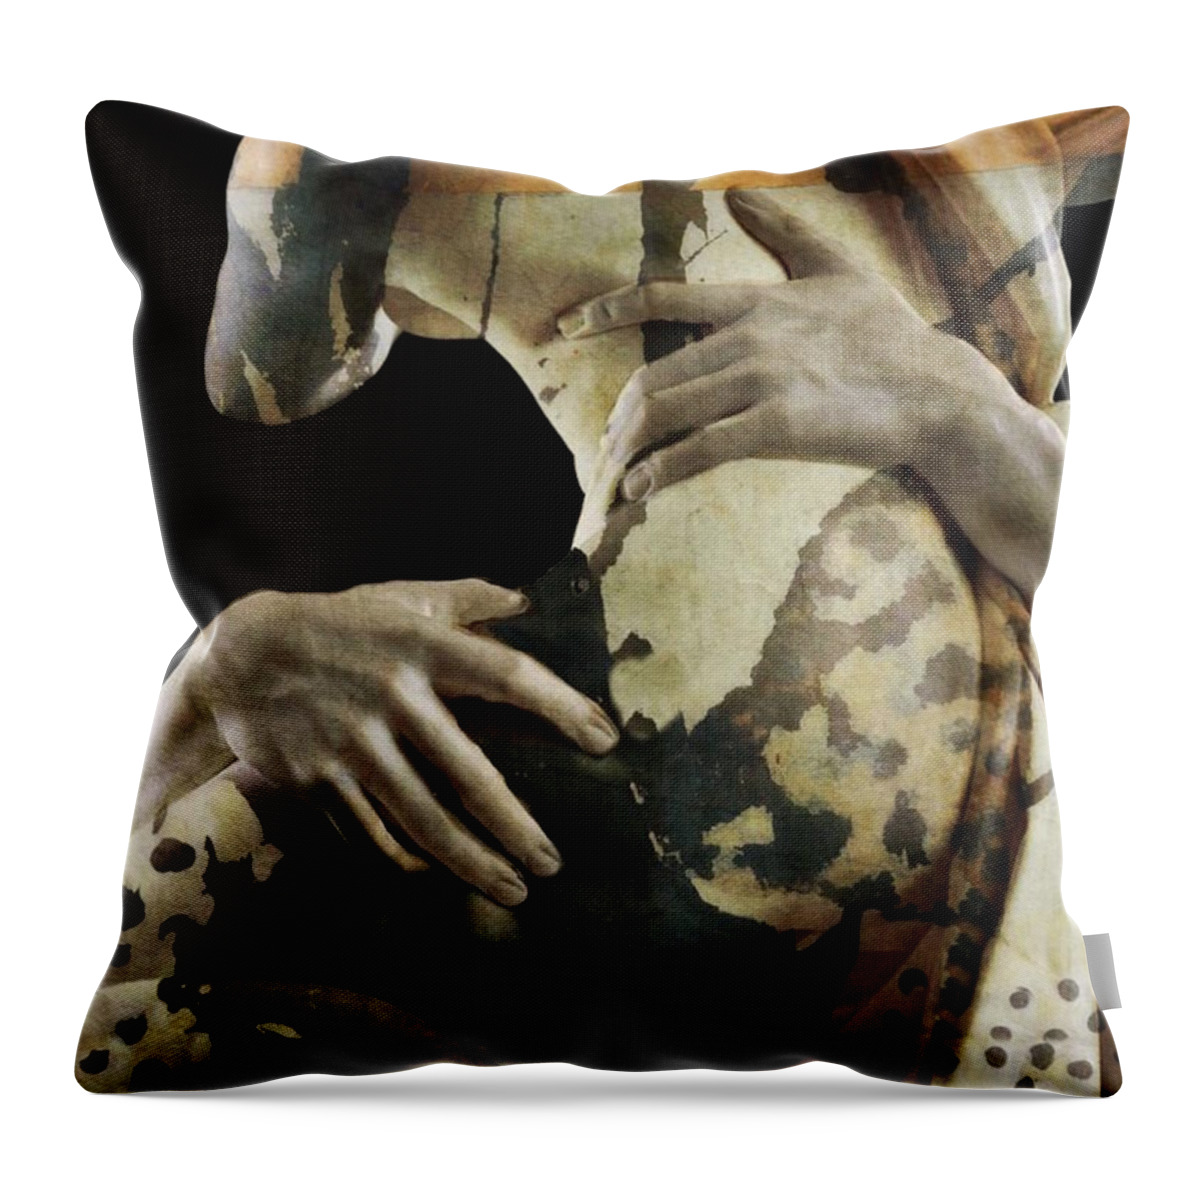 Love Throw Pillow featuring the digital art She by Paul Lovering